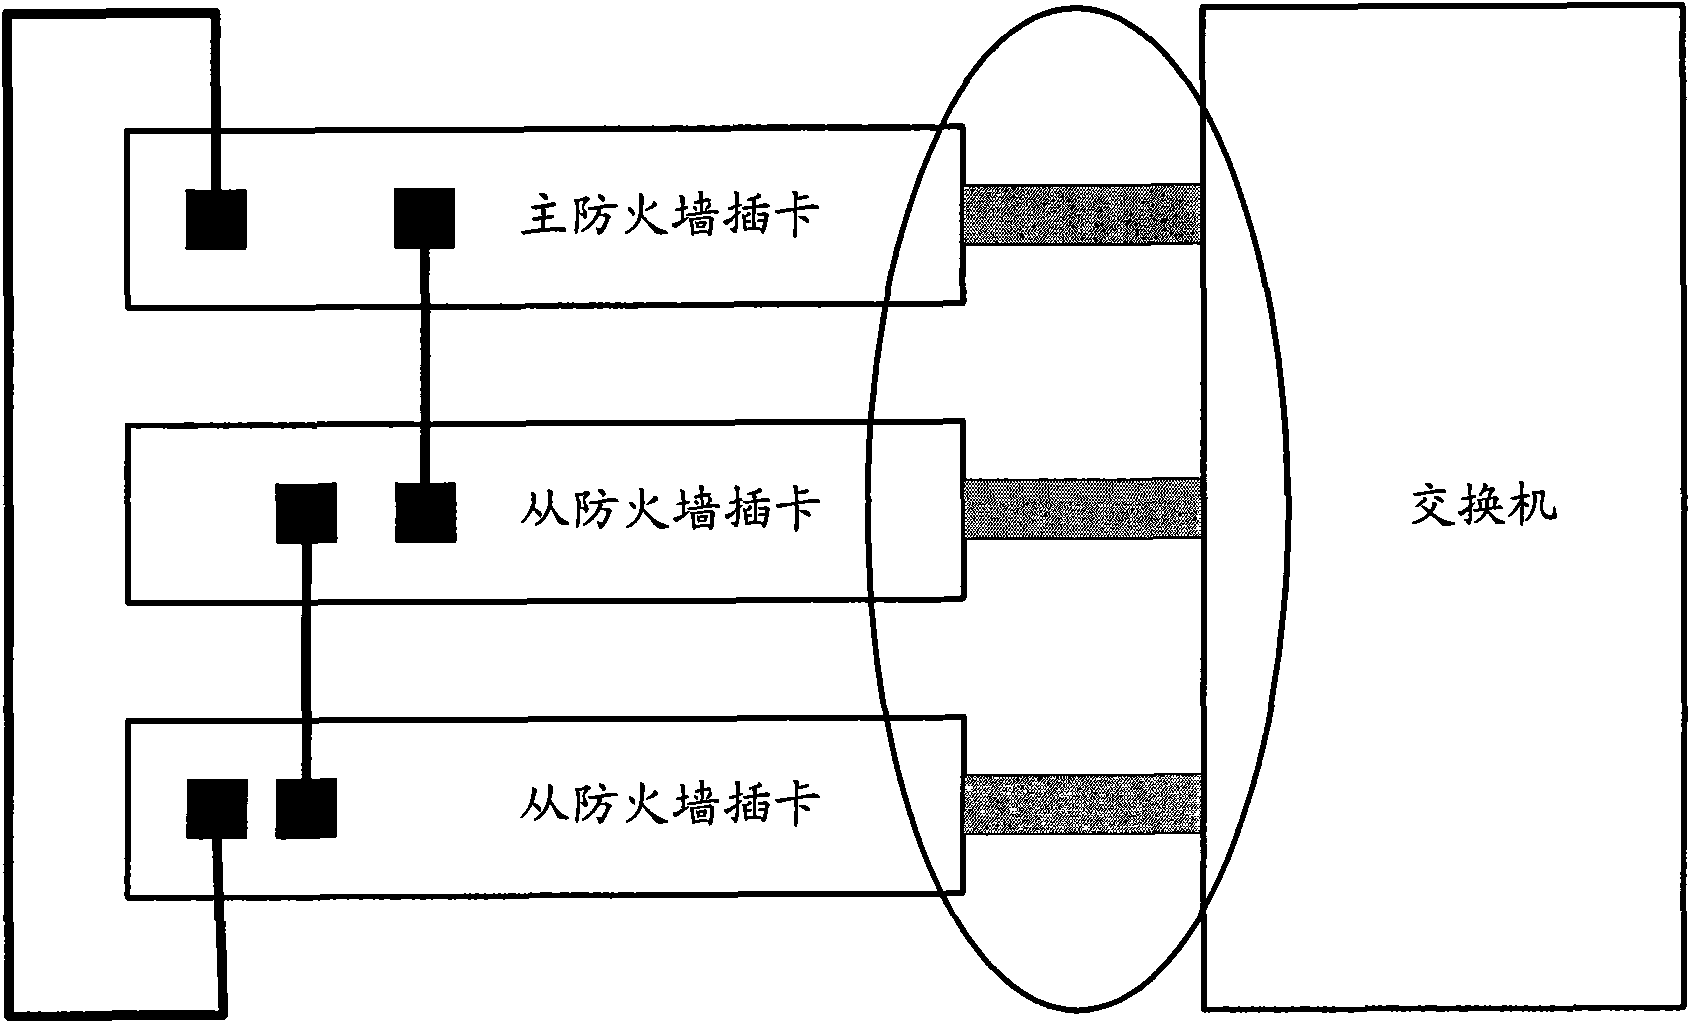 Network safety allocating method and network safety device